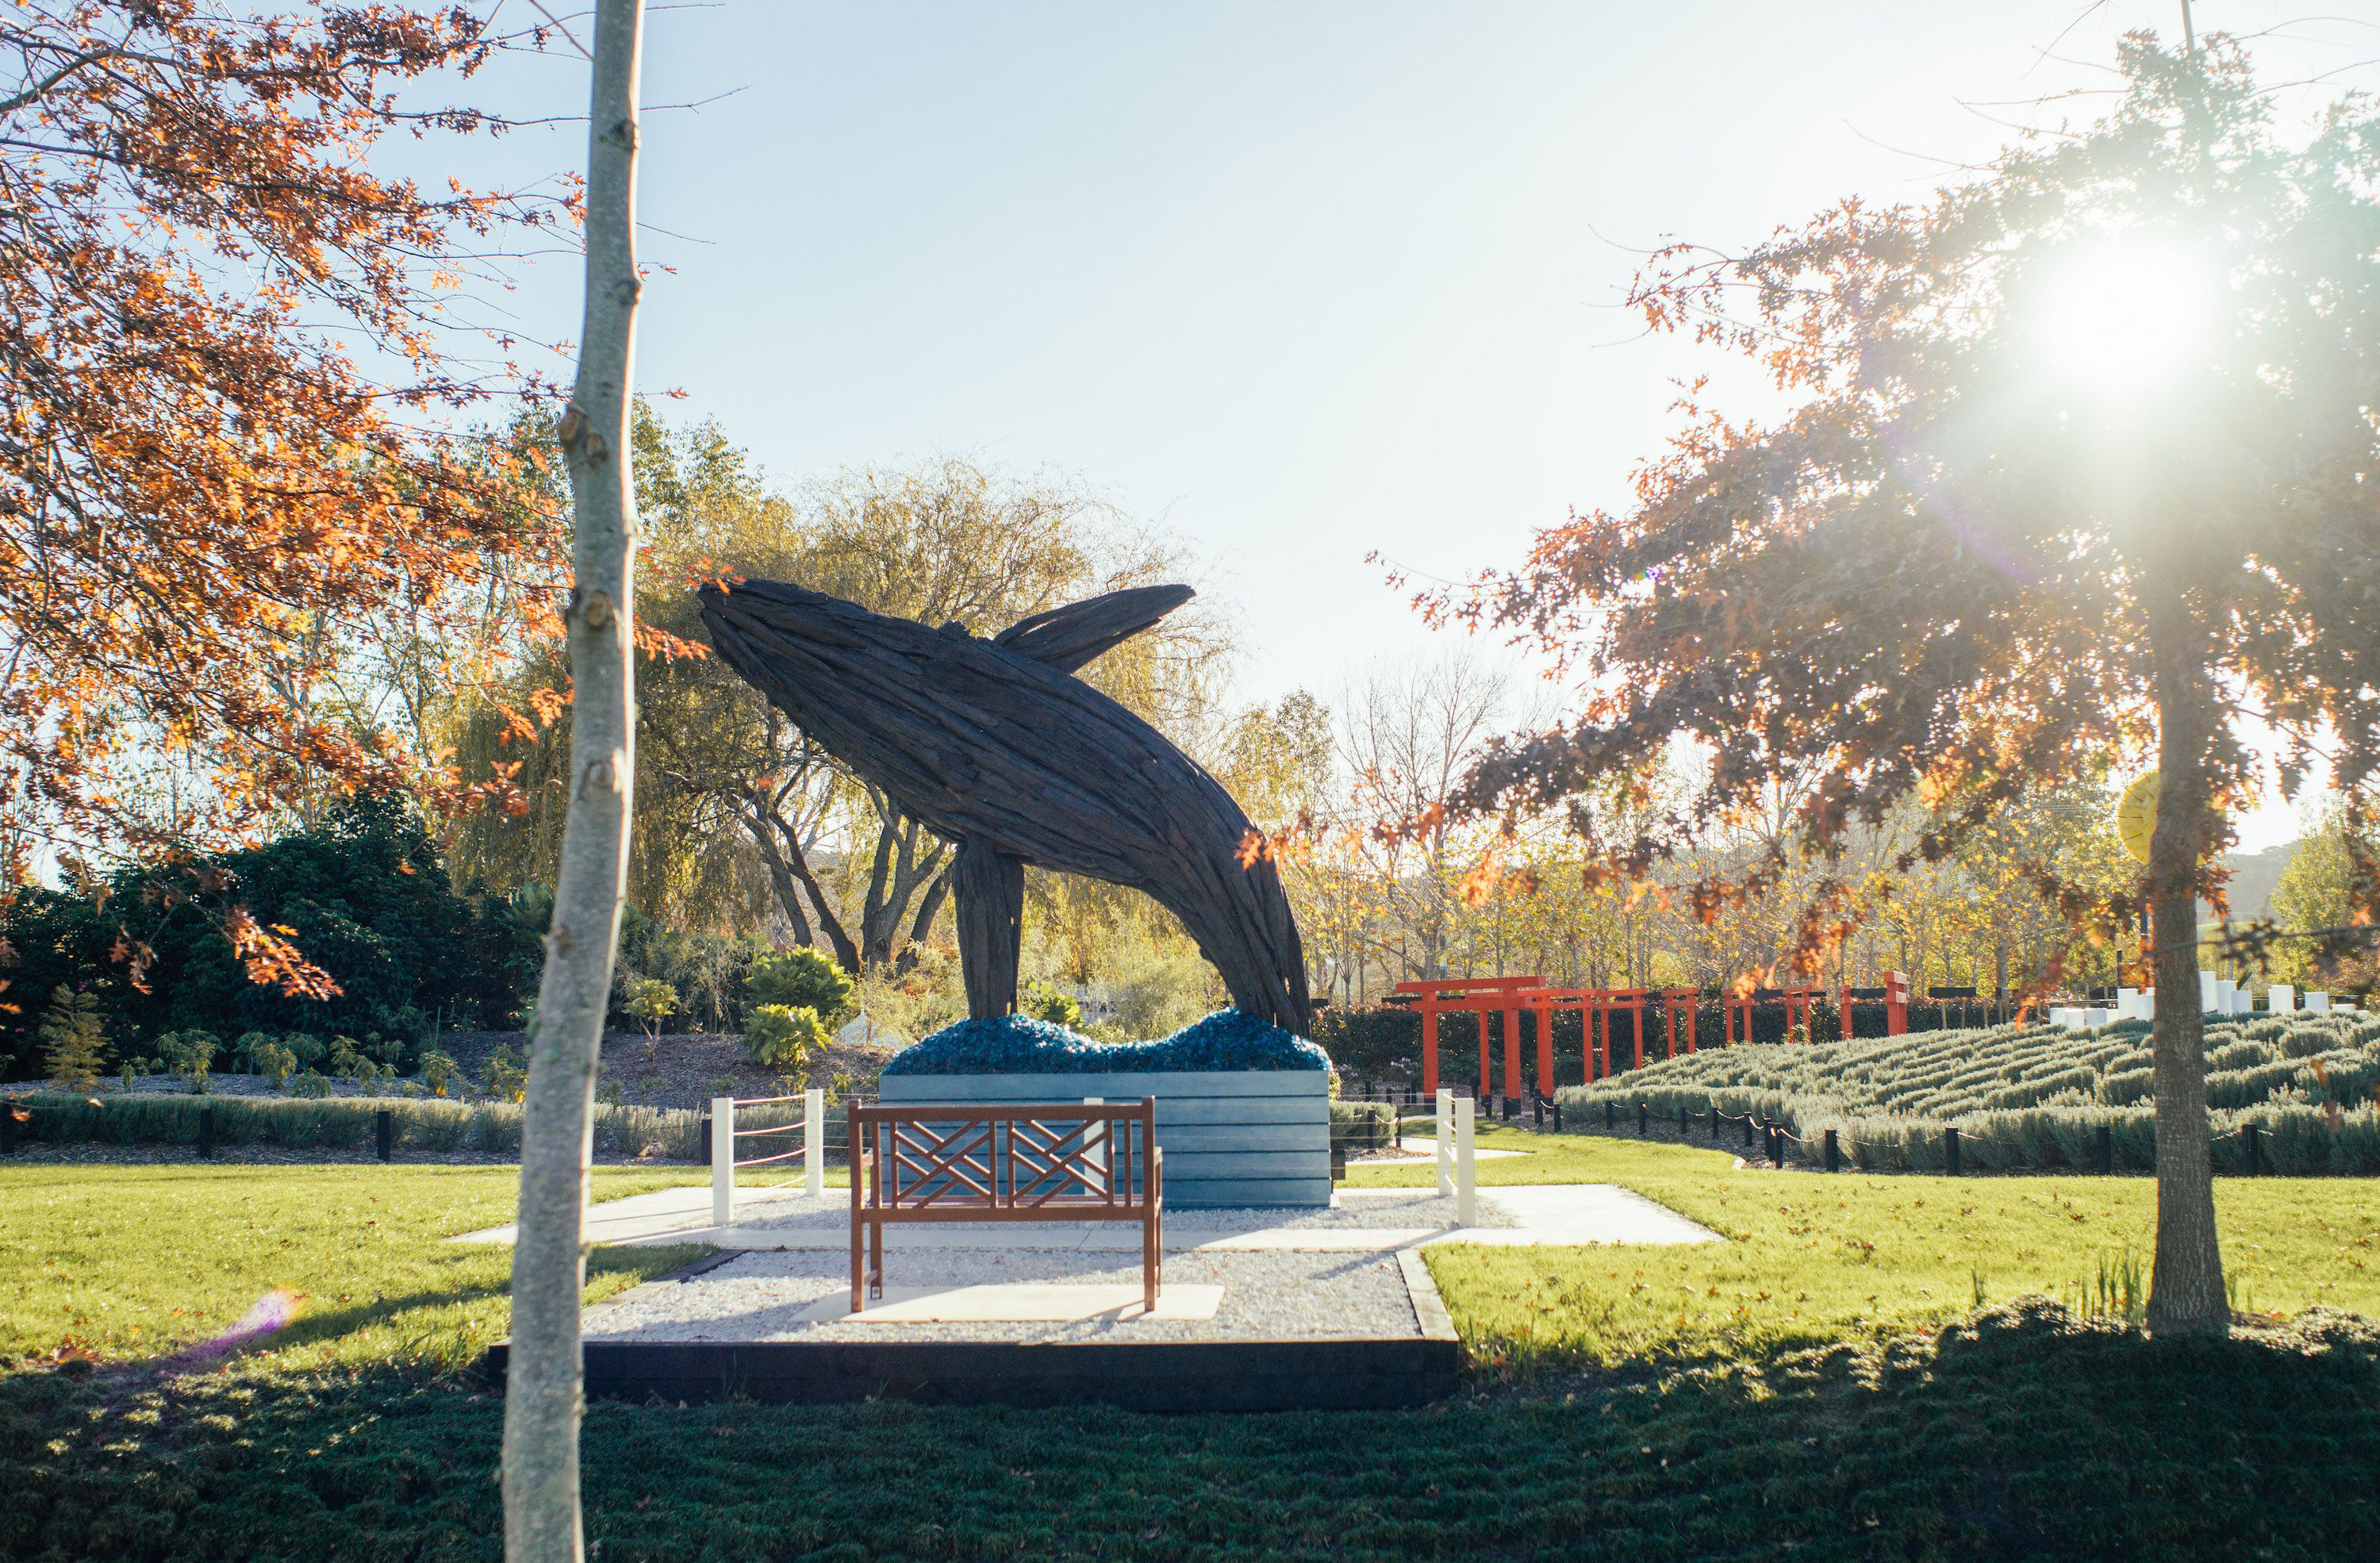 A dynamic sculpture of a whale in the outdoors